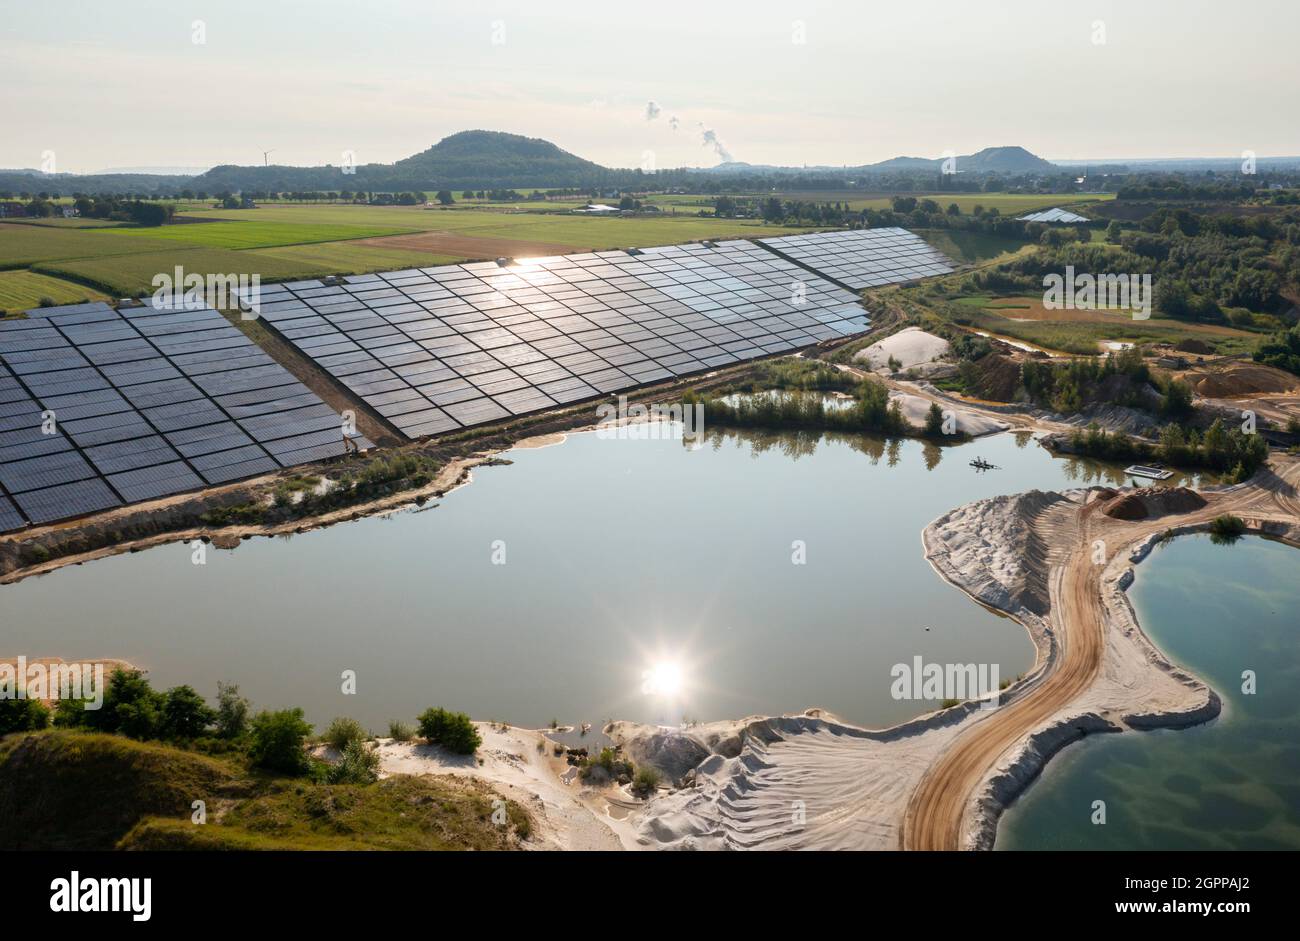 Germany, Herzogenrath, Aerial view of solar panels at sand mine Stock Photo